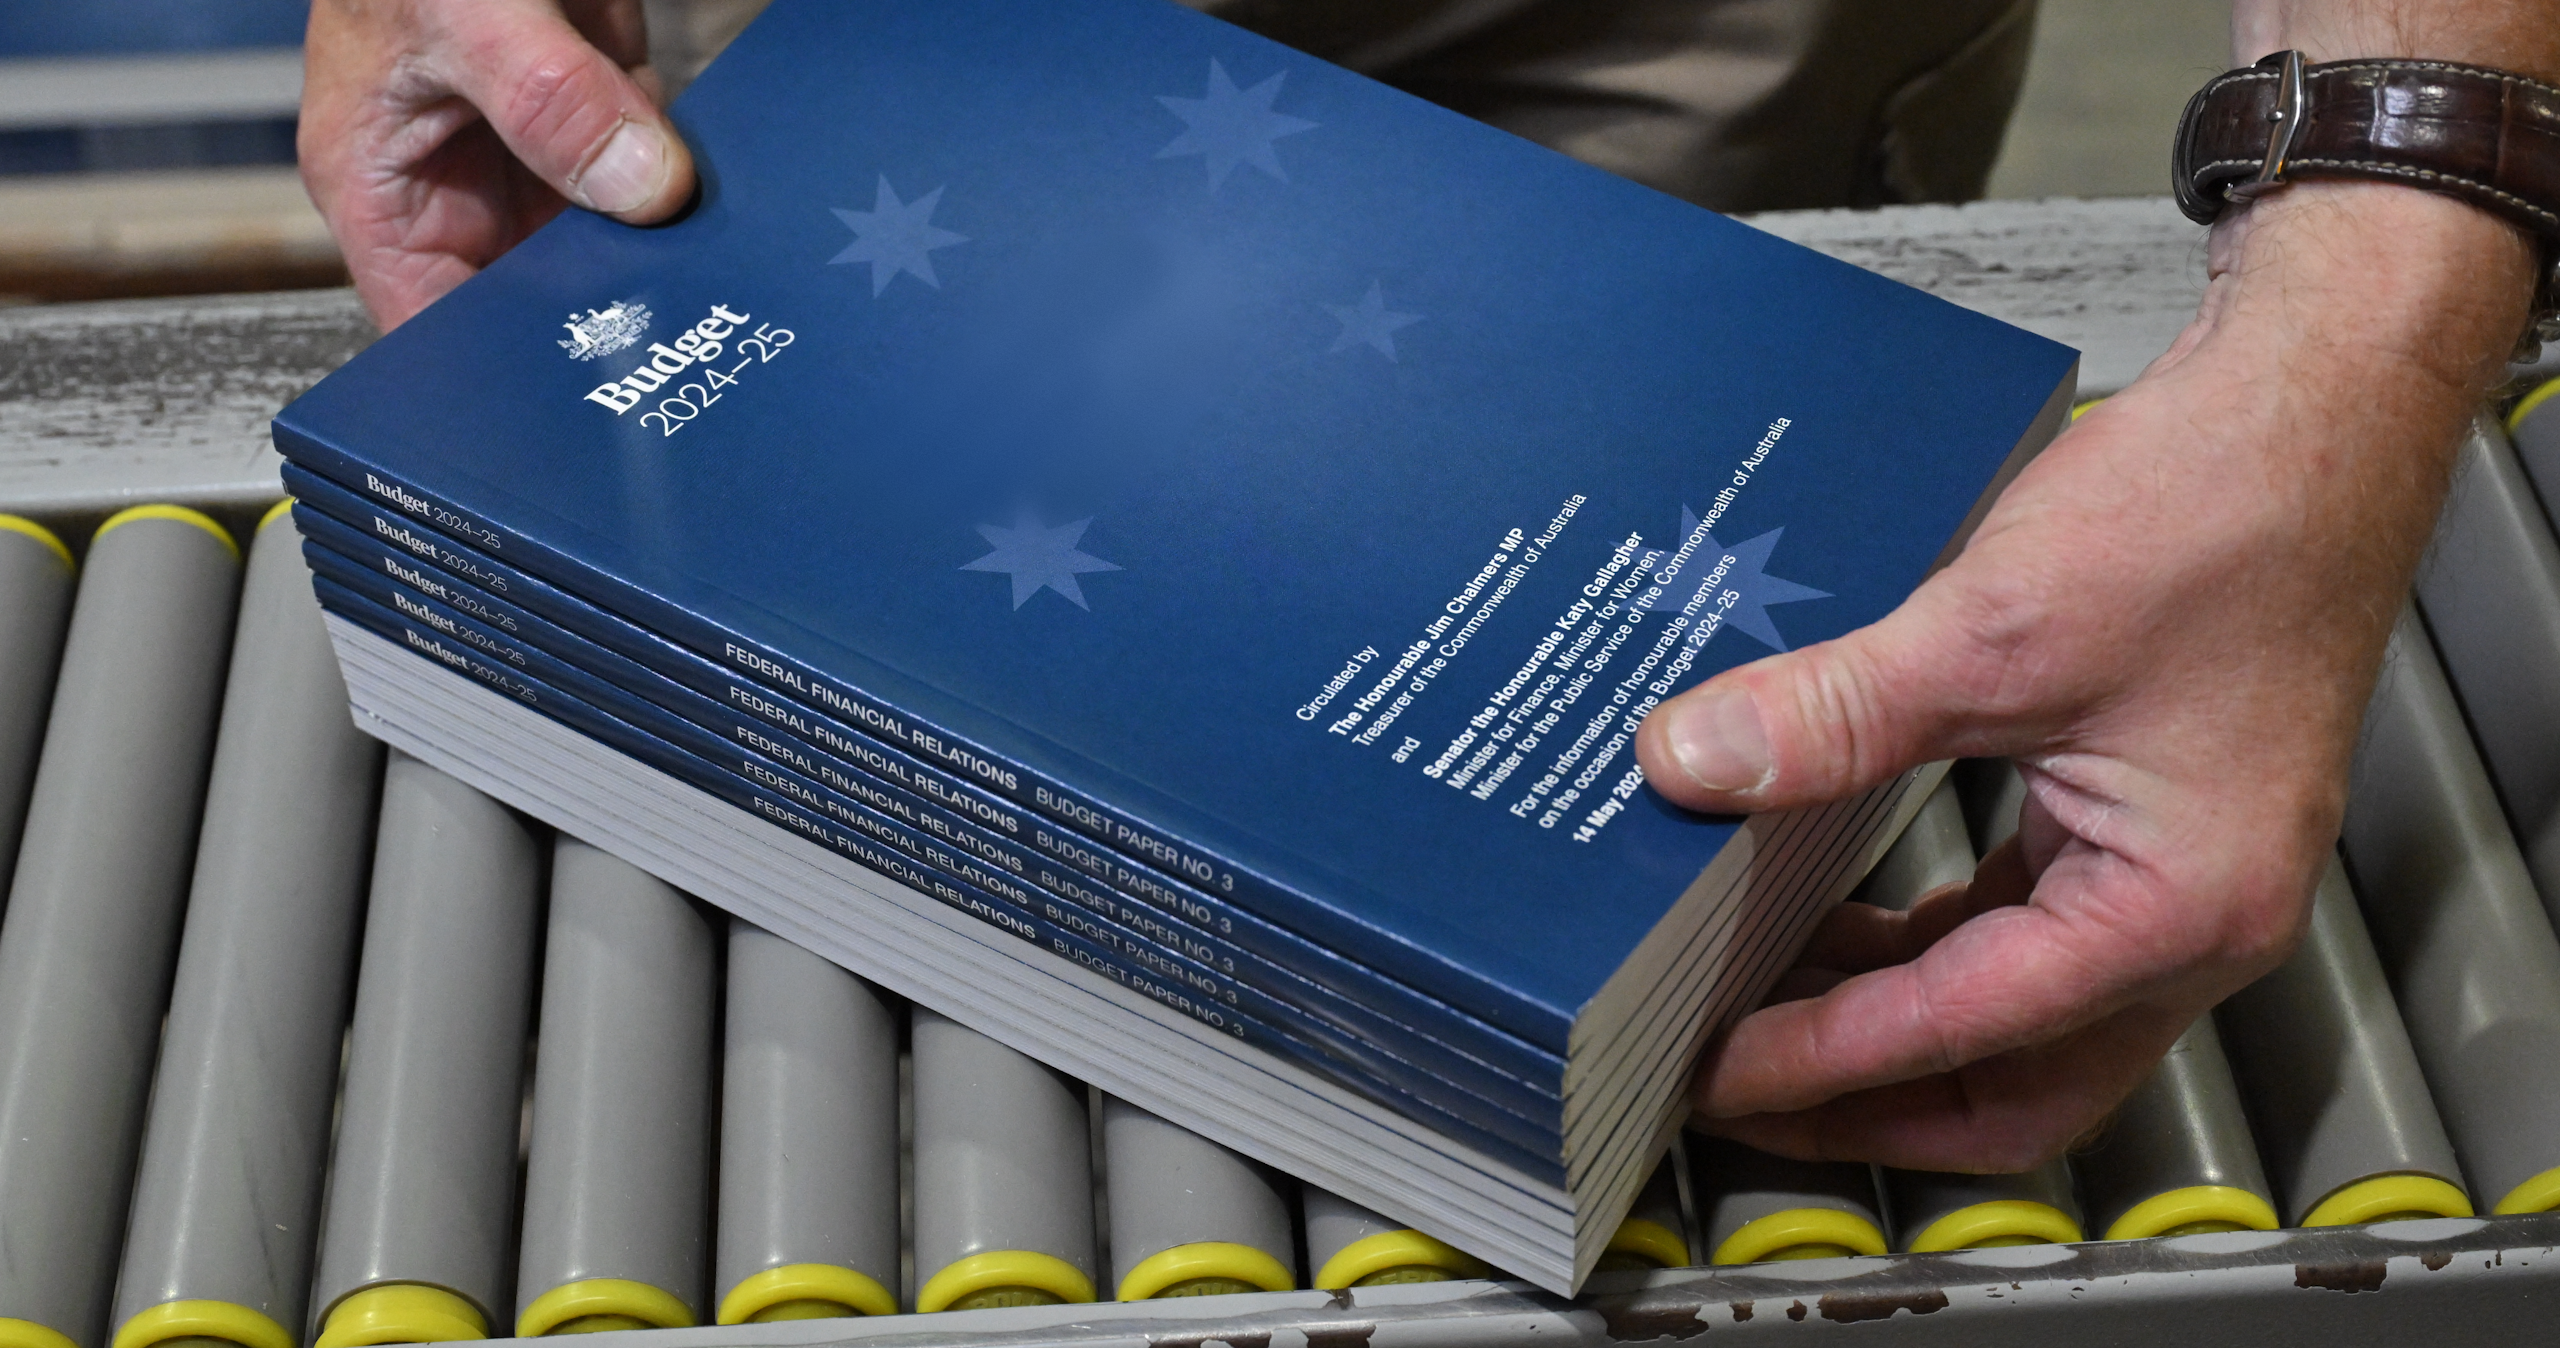 The 2024-2025 Budget Papers are seen at a printing facility prior to being delivered to Parliament House